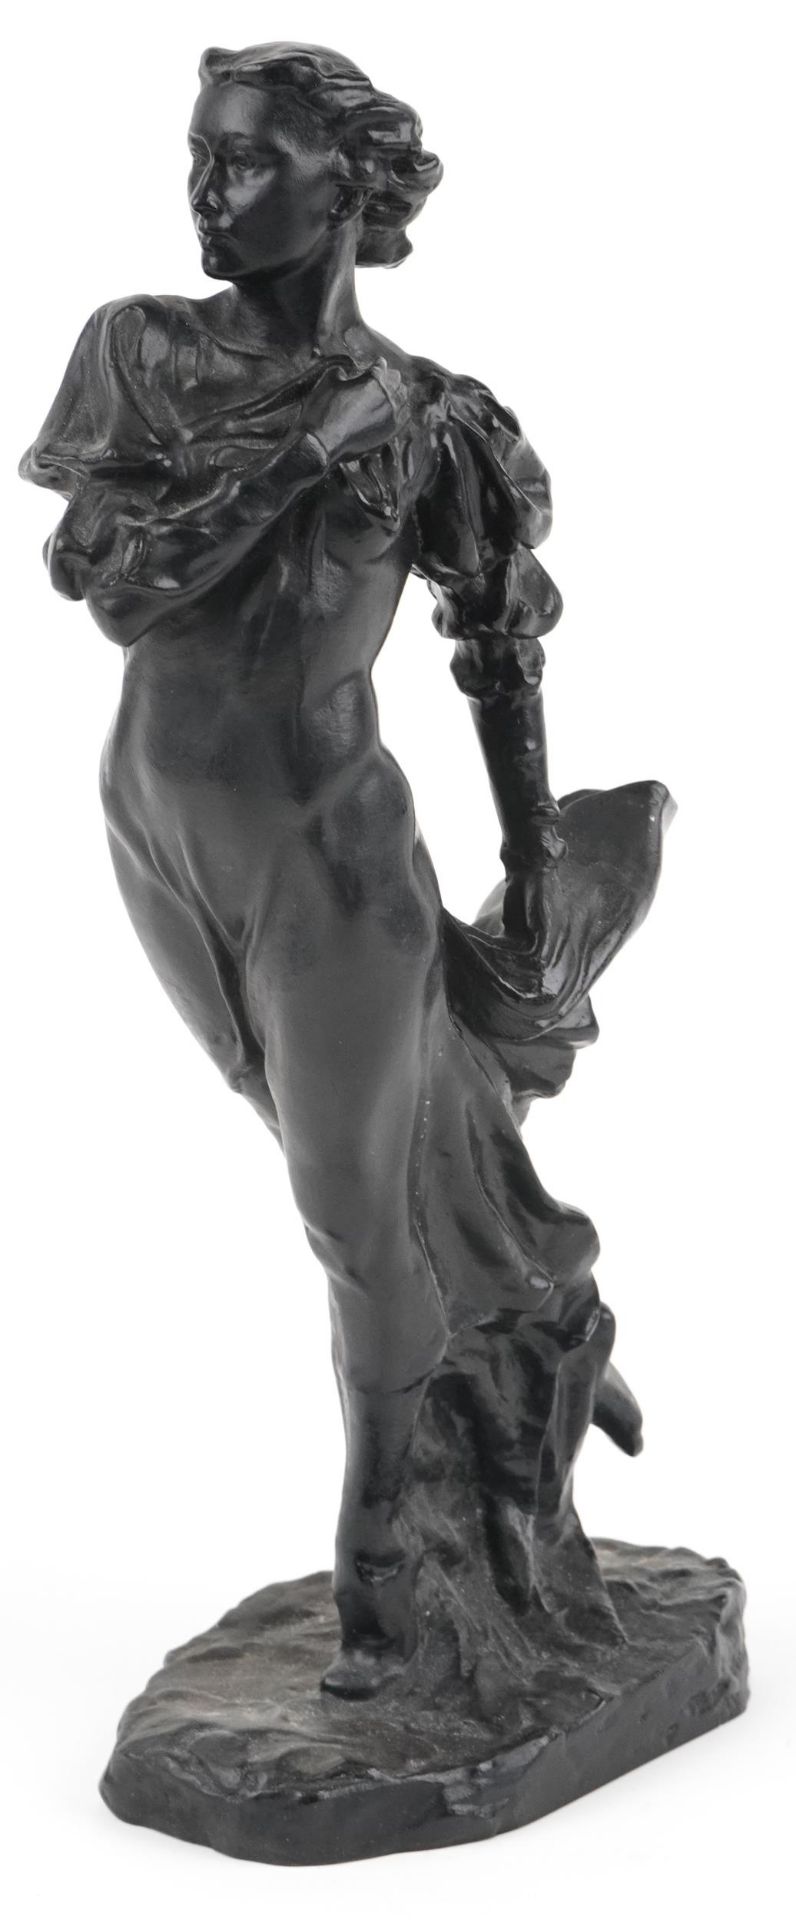 1970s Russian cast iron statuette of a female wearing a flowing dress, Cyrillic script and dated